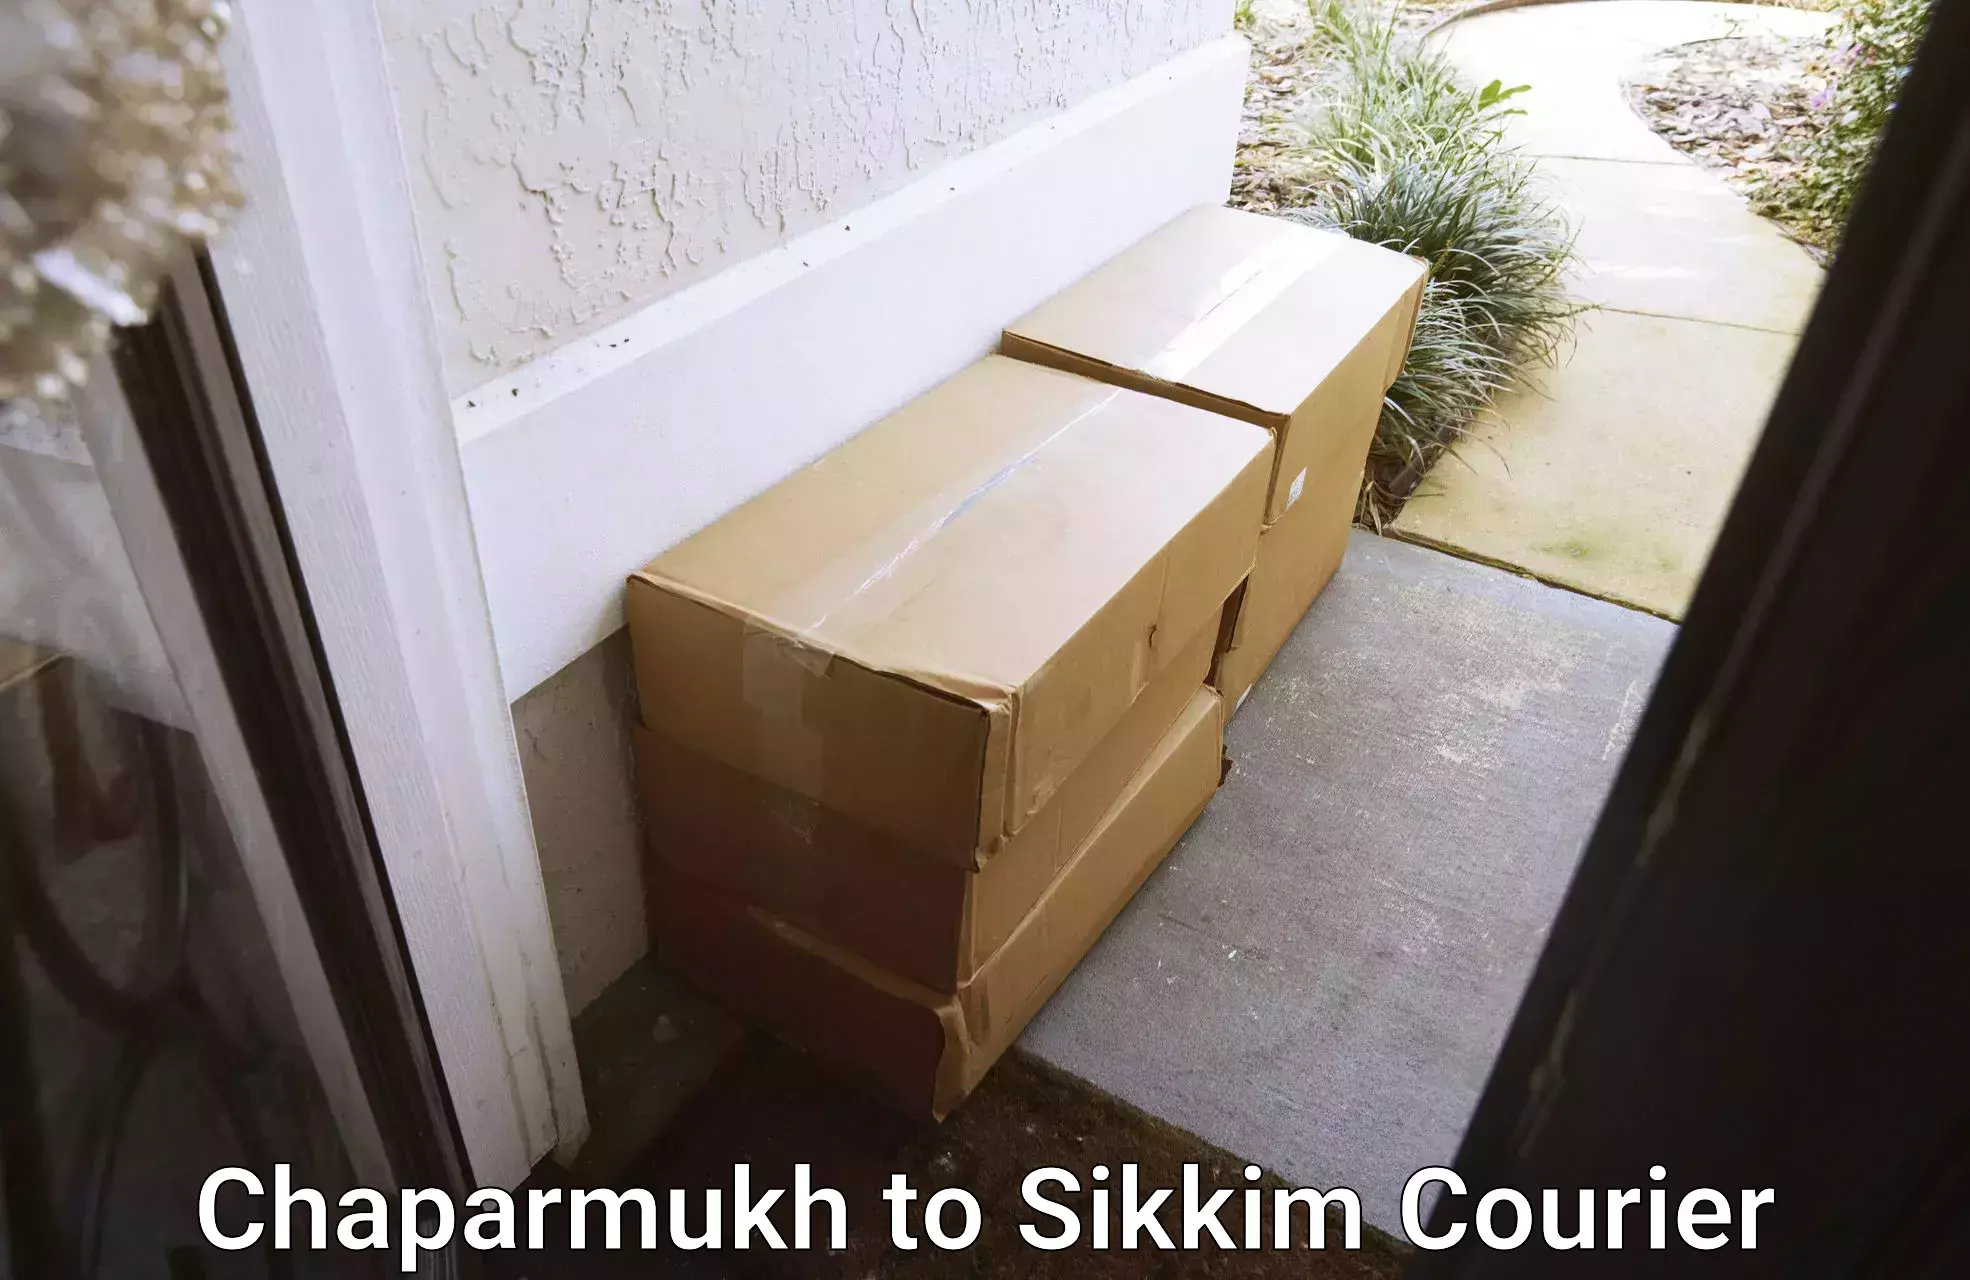 Residential courier service Chaparmukh to North Sikkim